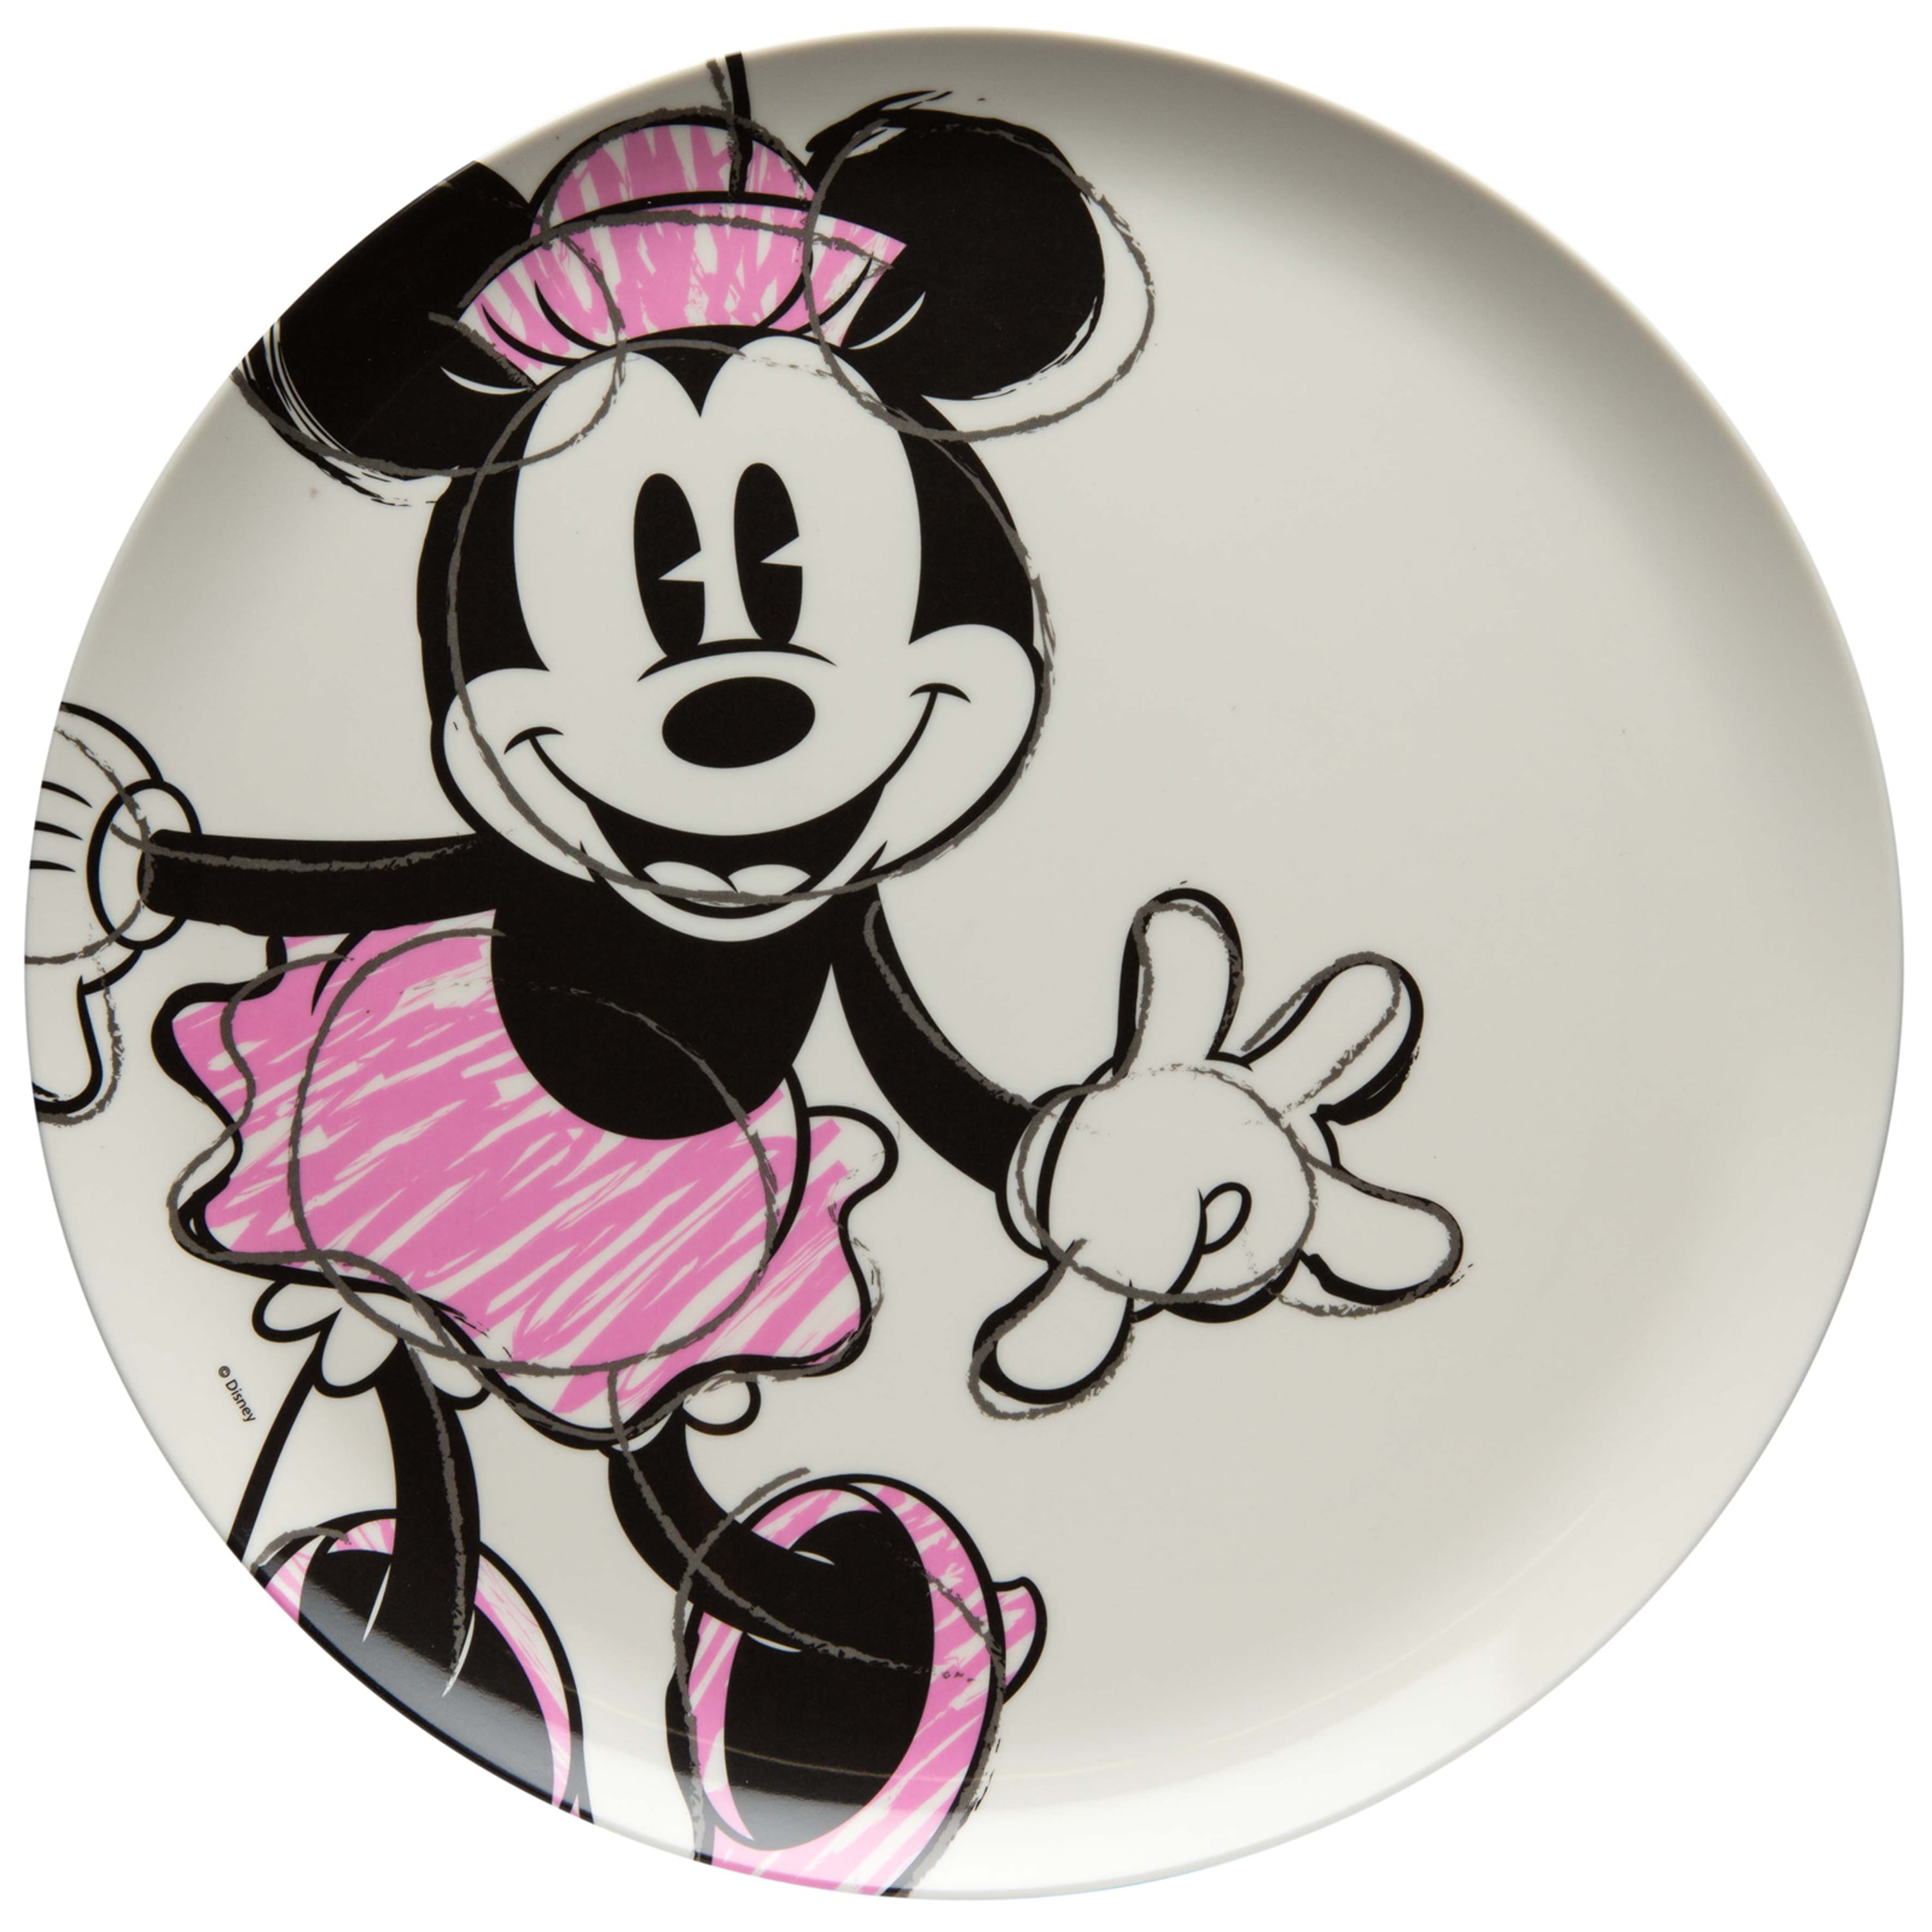 Buy Zak! Designs Dinner Plate with Mickey Mouse Graphics, Reusable,  Break-resistant , BPA-free Melamine, 10